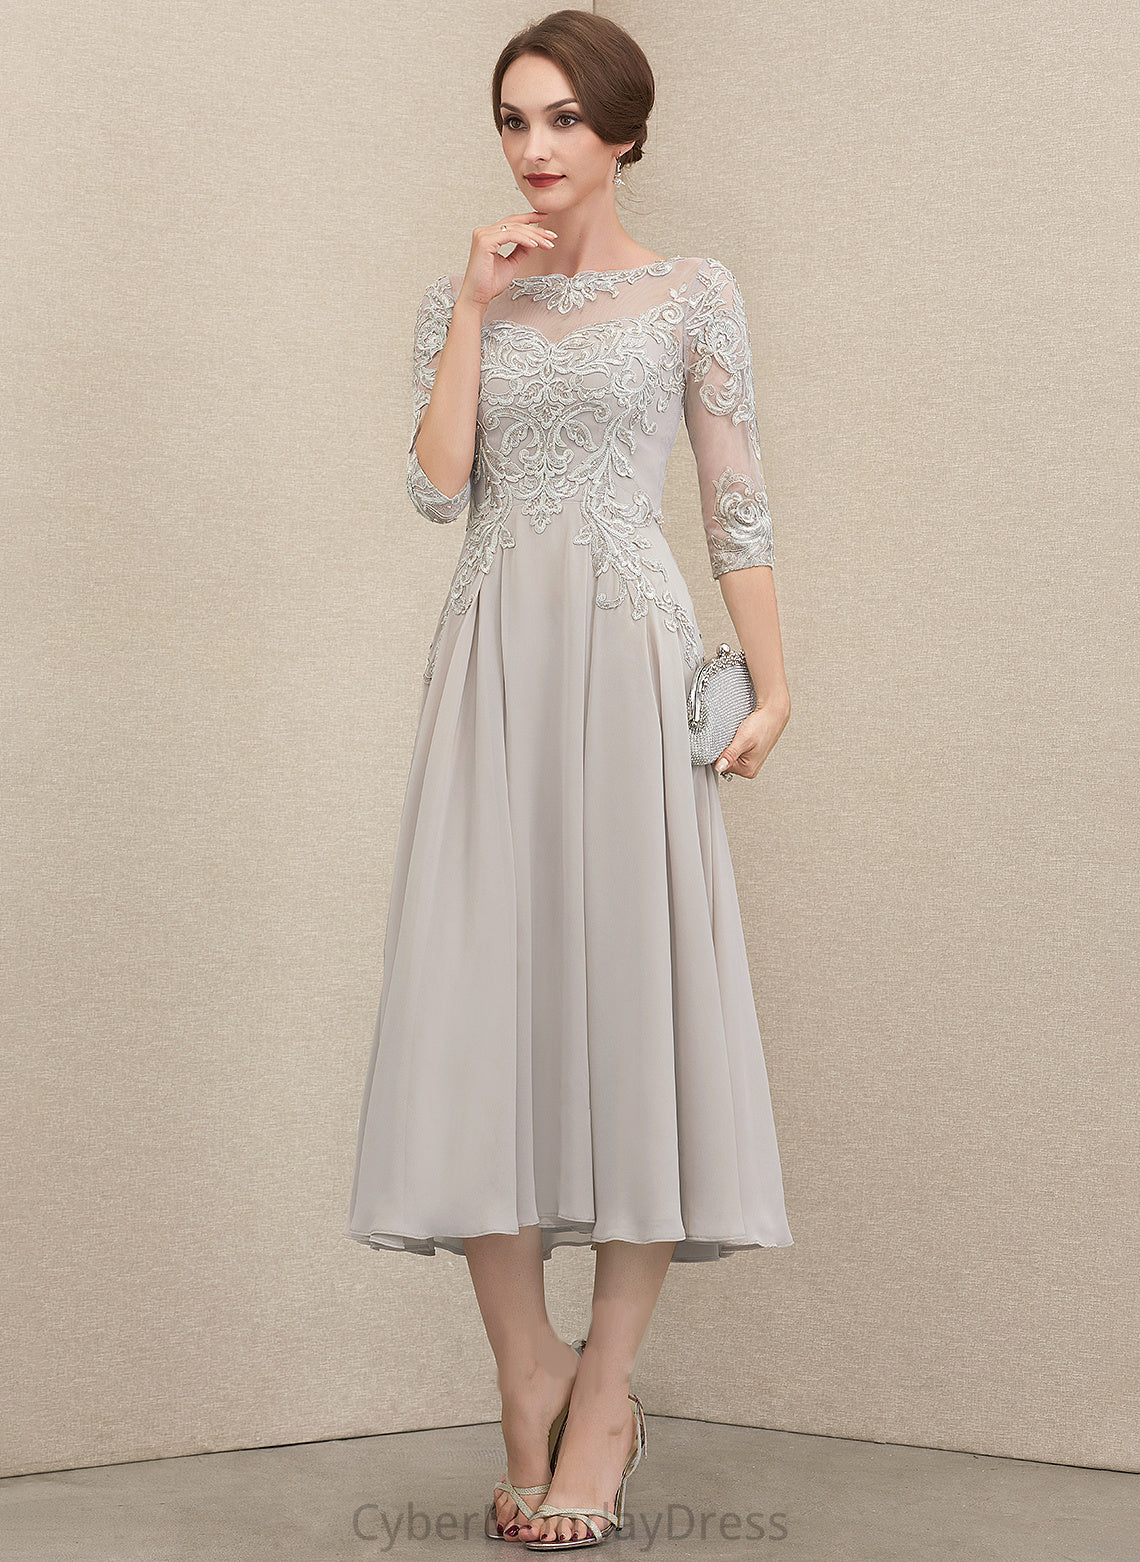 Dress Cocktail Neck Chiffon Tea-Length Pearl Cocktail Dresses Sequins Lace With Beading Scoop A-Line